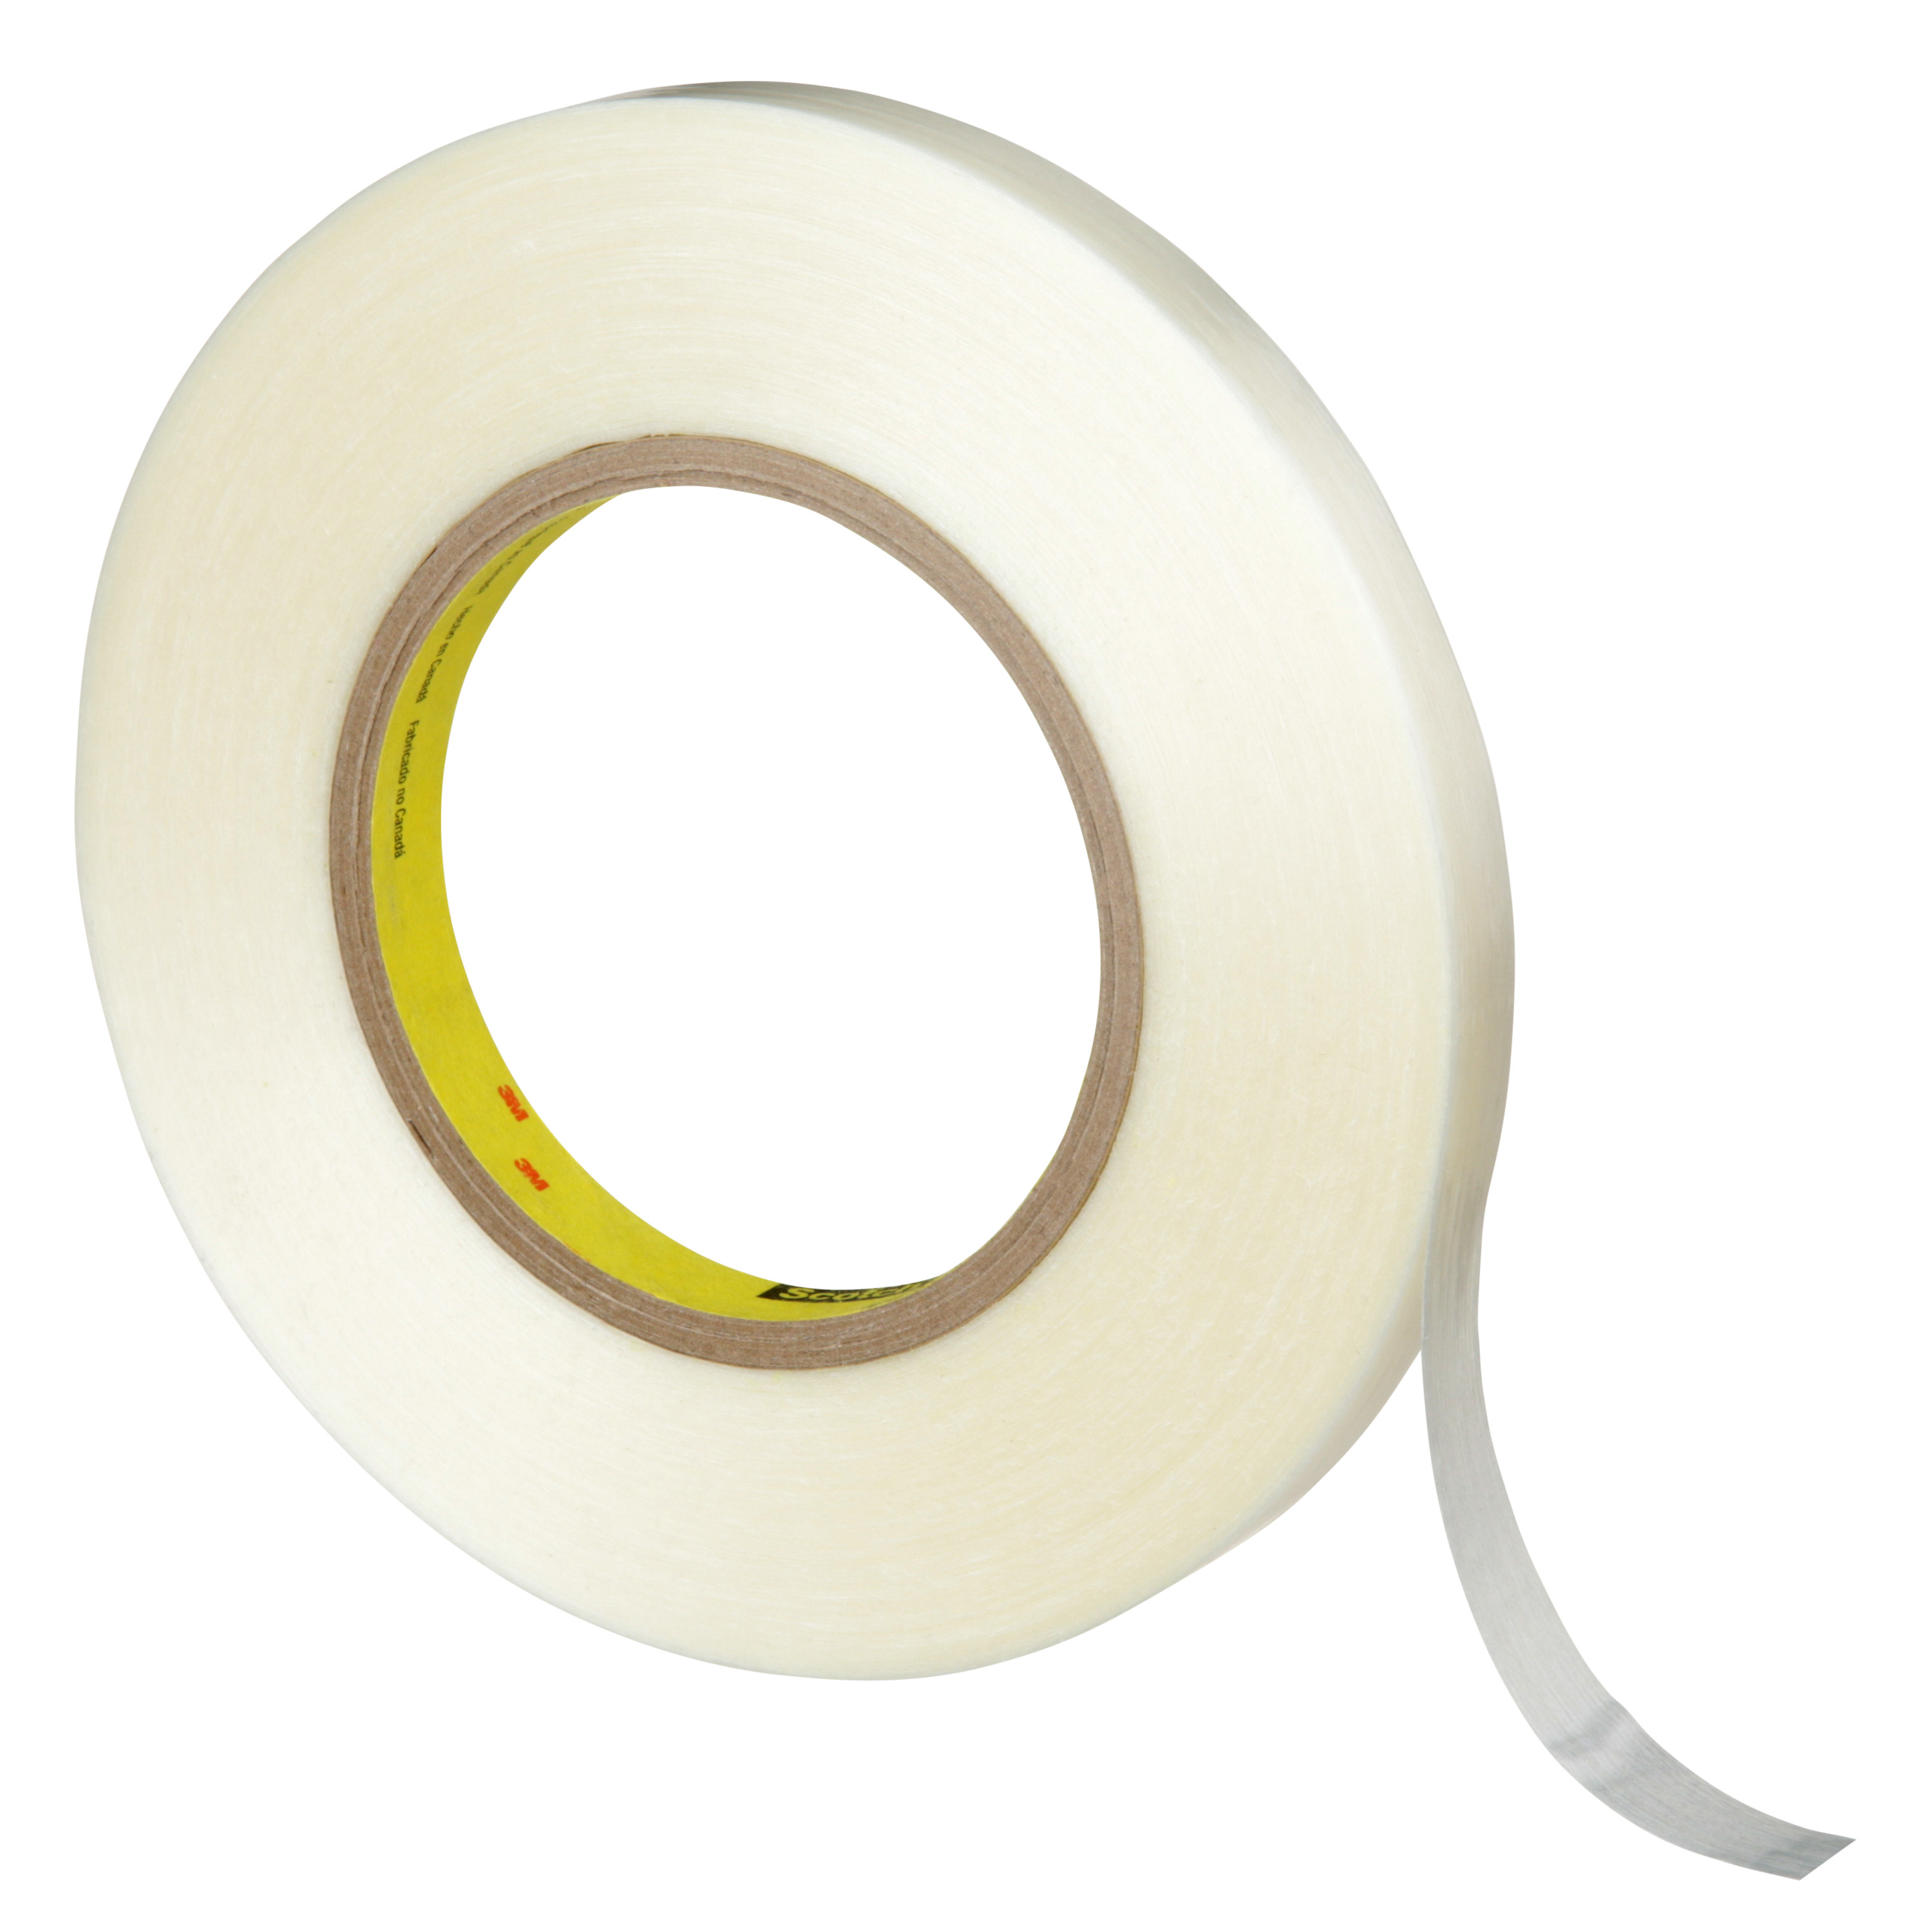 Product Number 880 | Scotch® Filament Tape 880